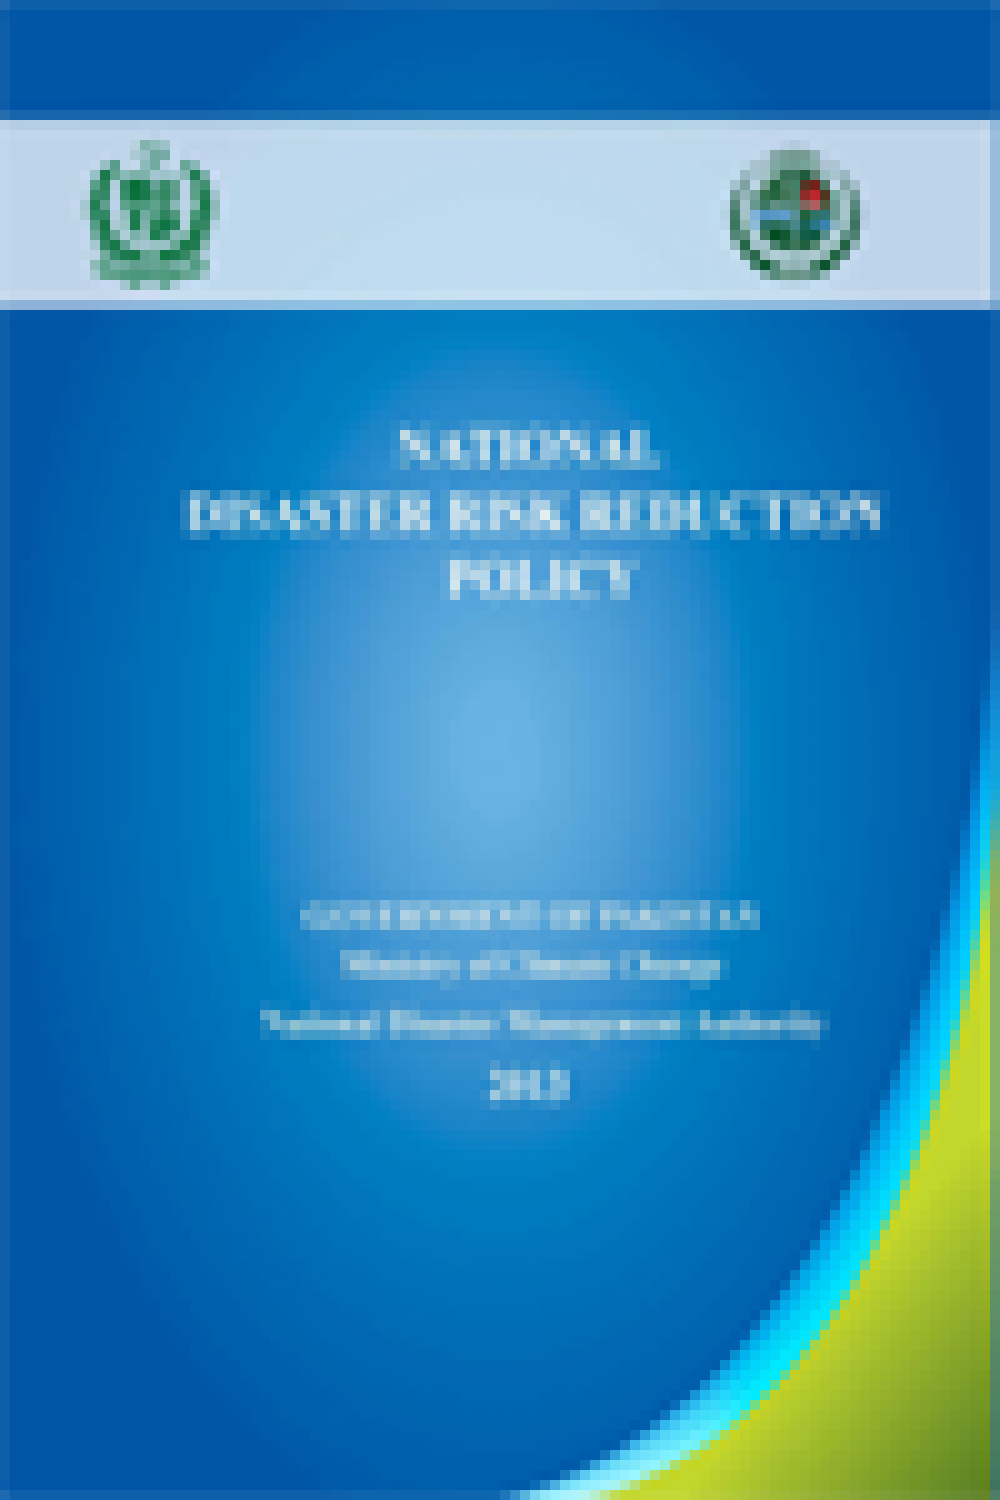 National Disaster Risk Reduction Policy 2013